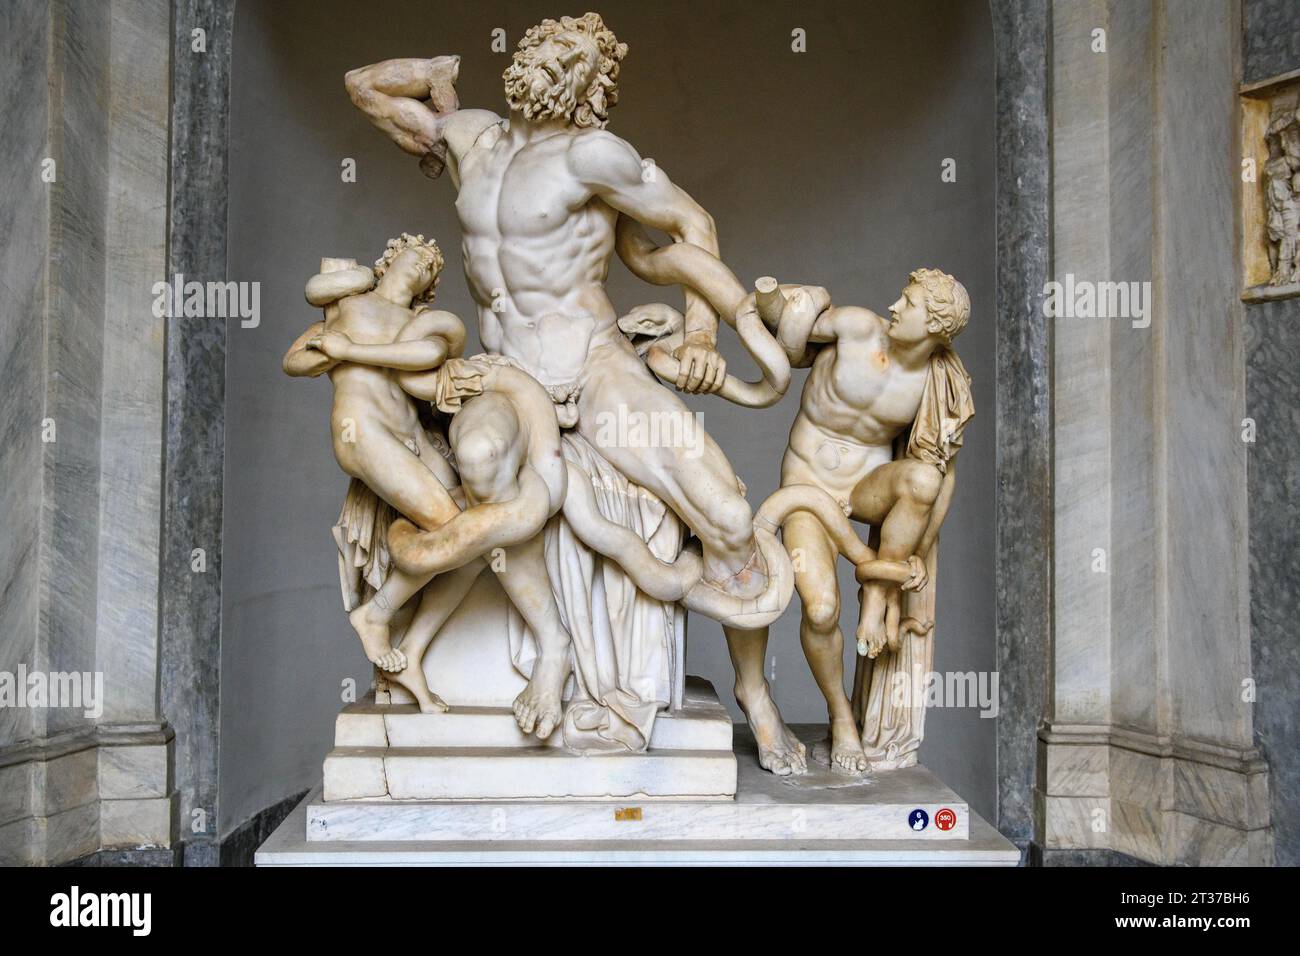 Photo with detail without base Frontal view of original antique marble sculpture Laocoon Group Priest Laocoon and his sons fighting with snakes Stock Photo